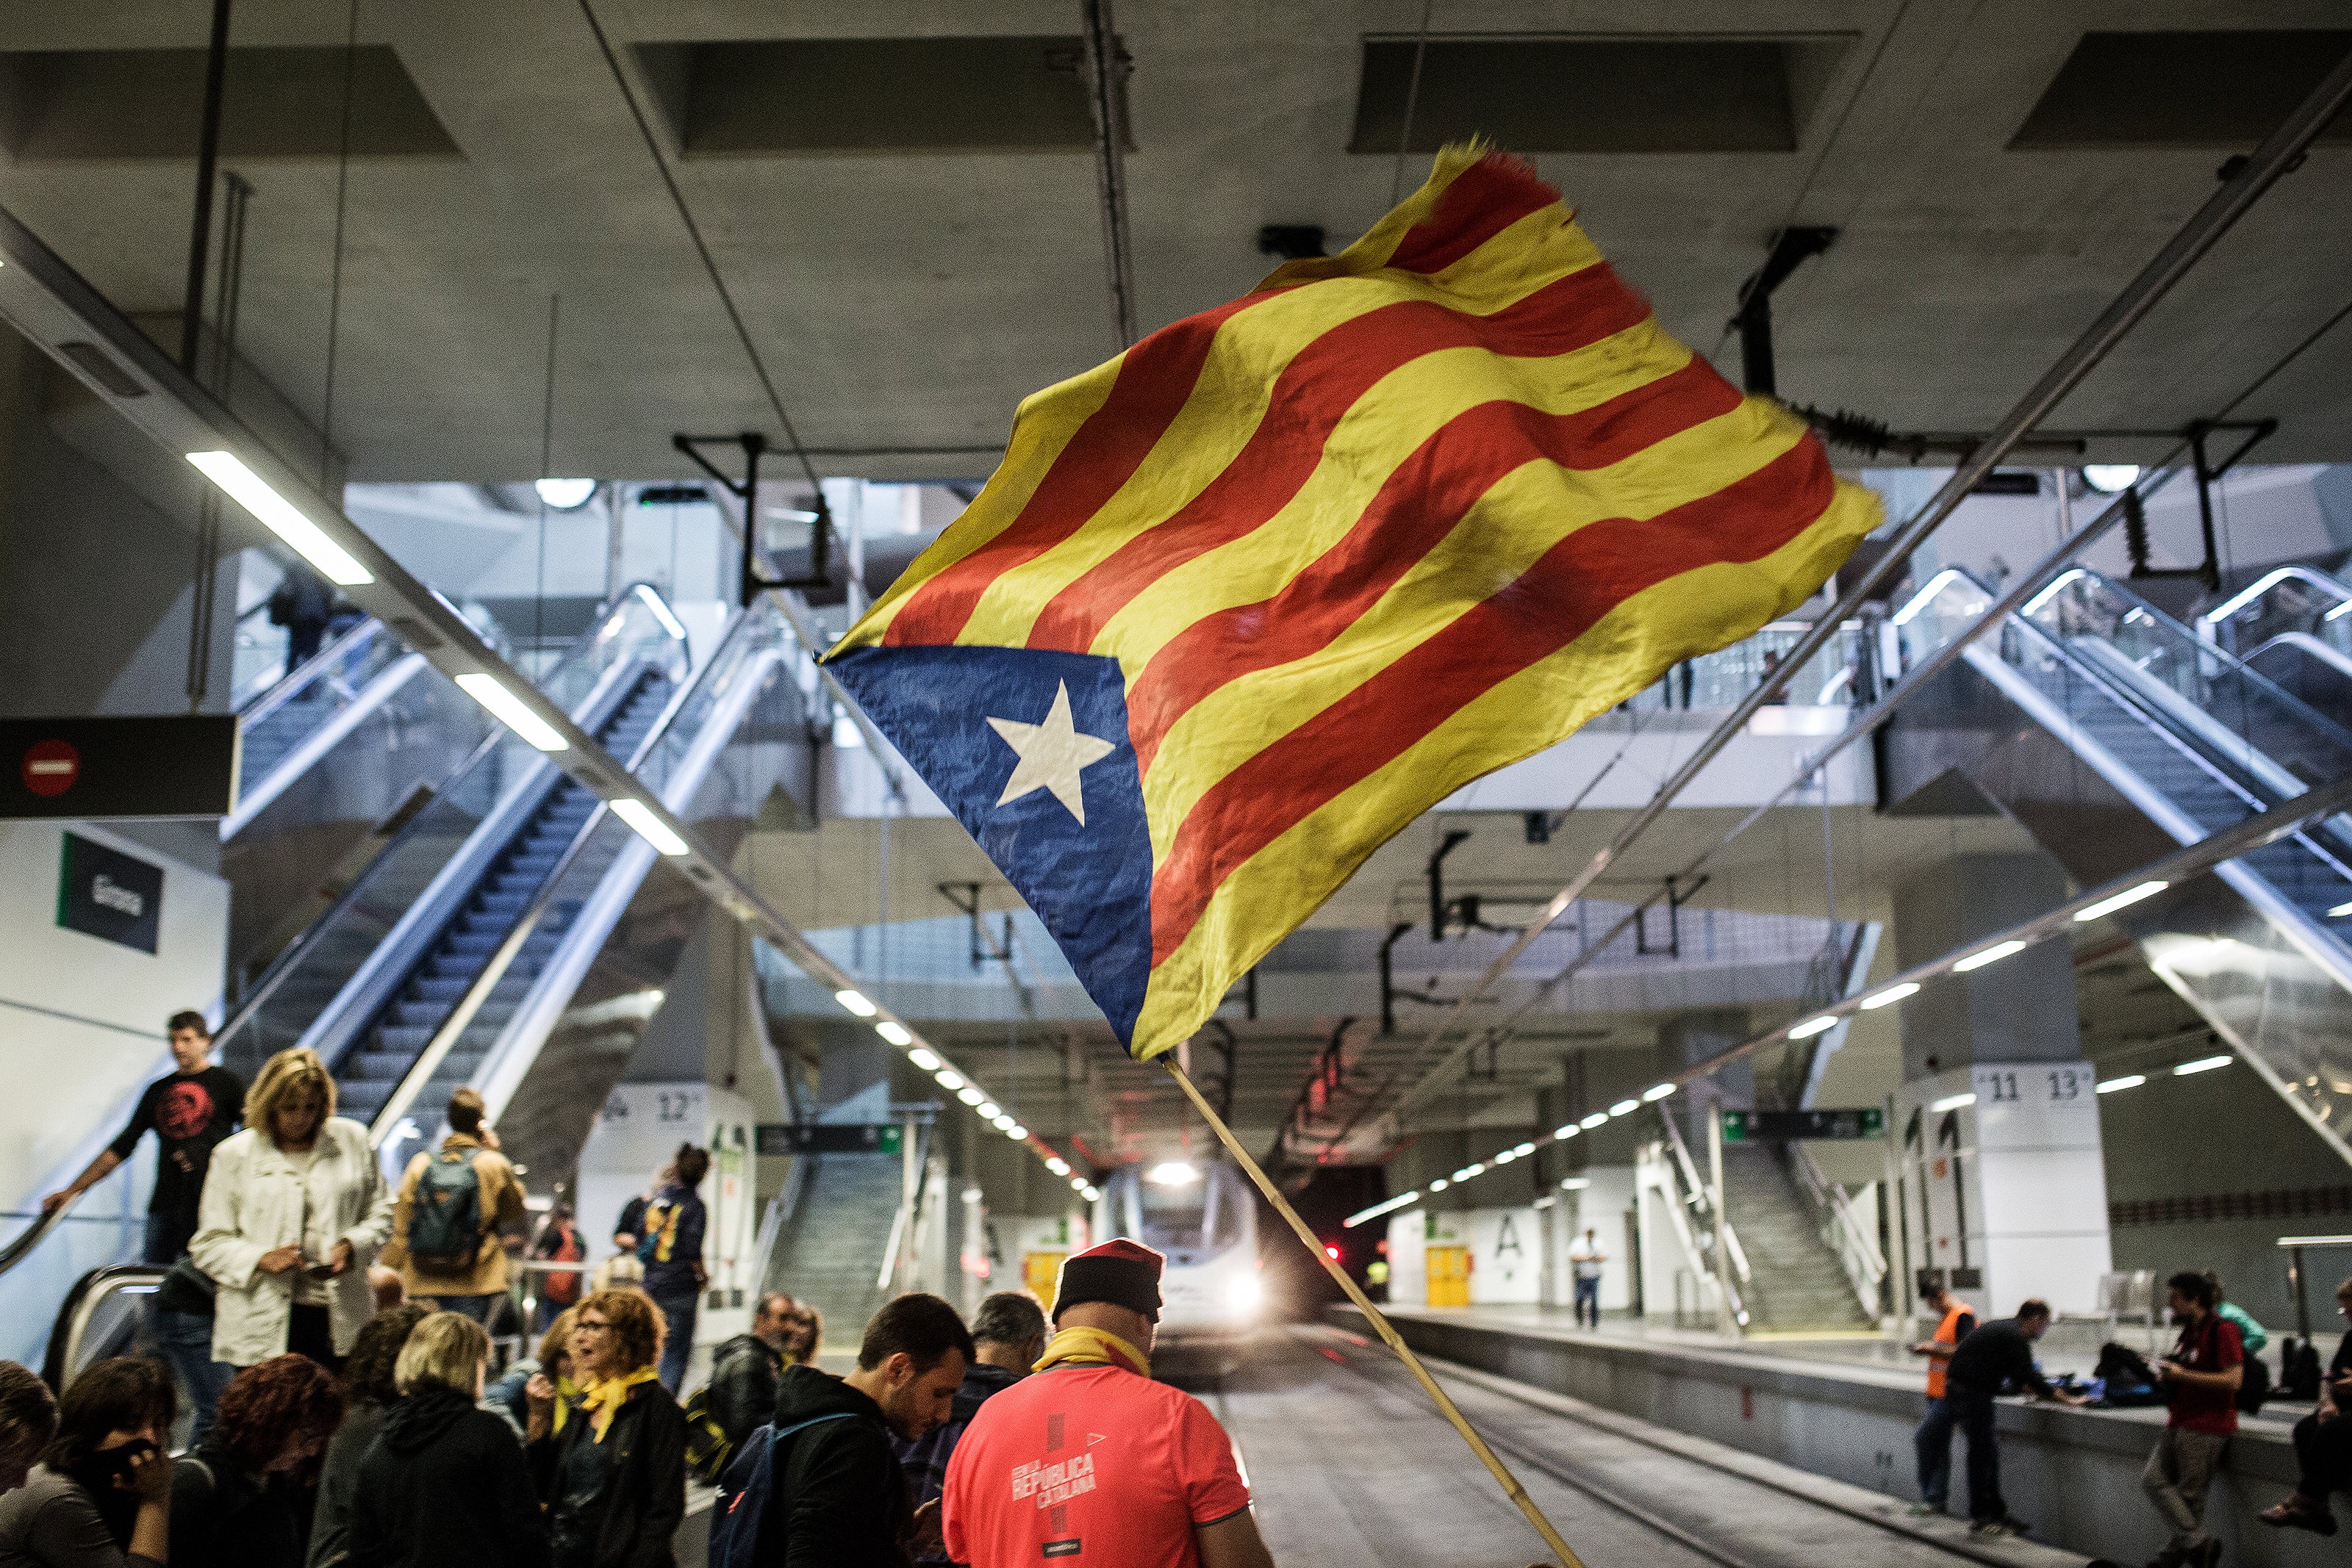 Overnight mobilizations in Catalan schools called for 1-O referendum anniversary